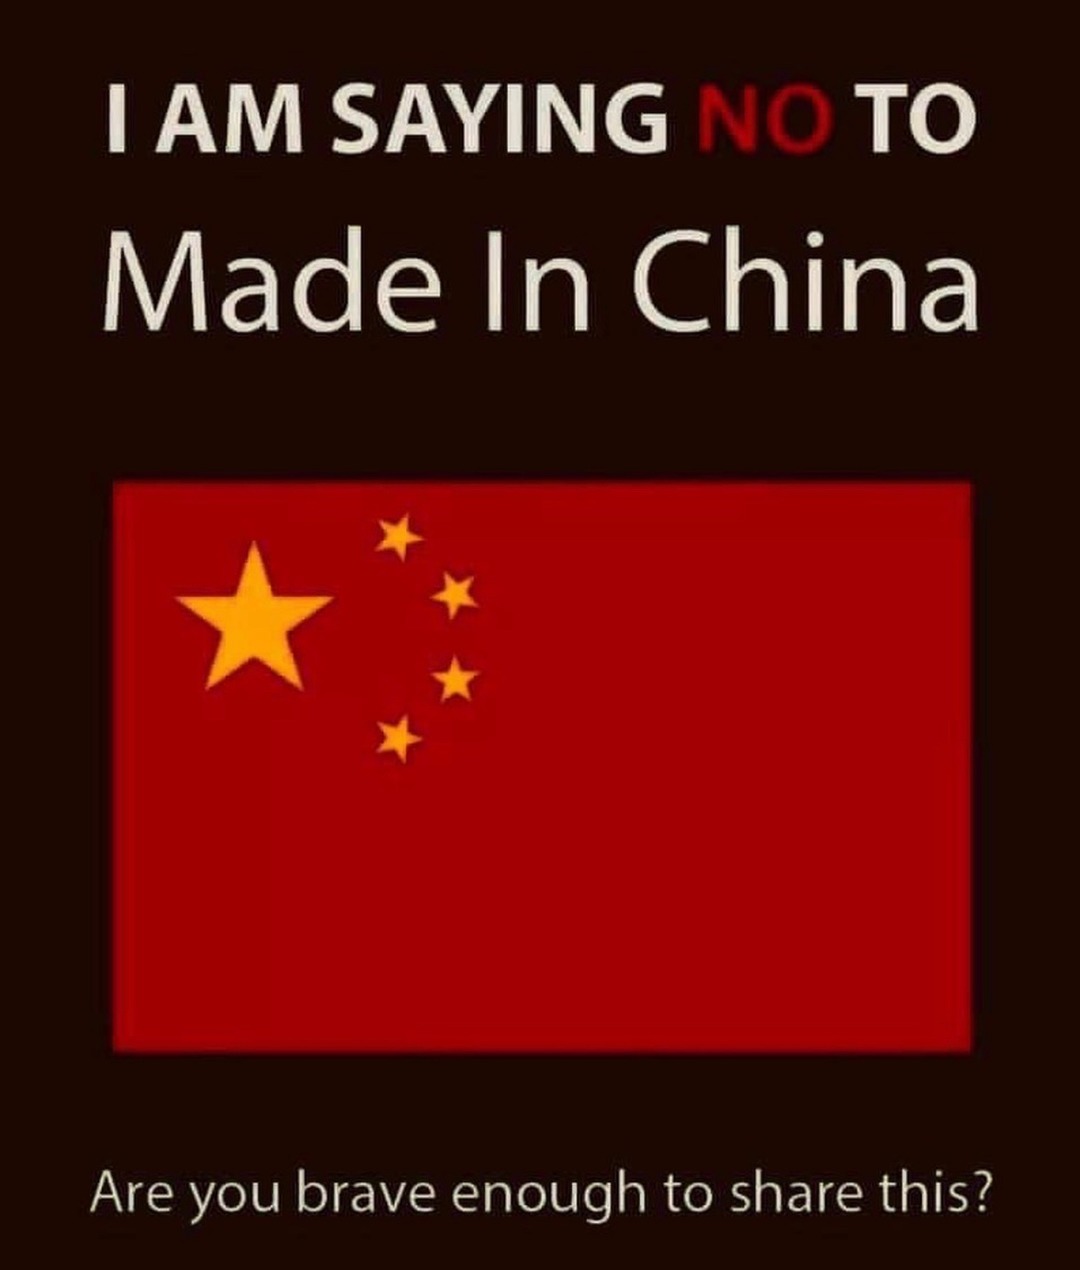 I say no to made in China - meme